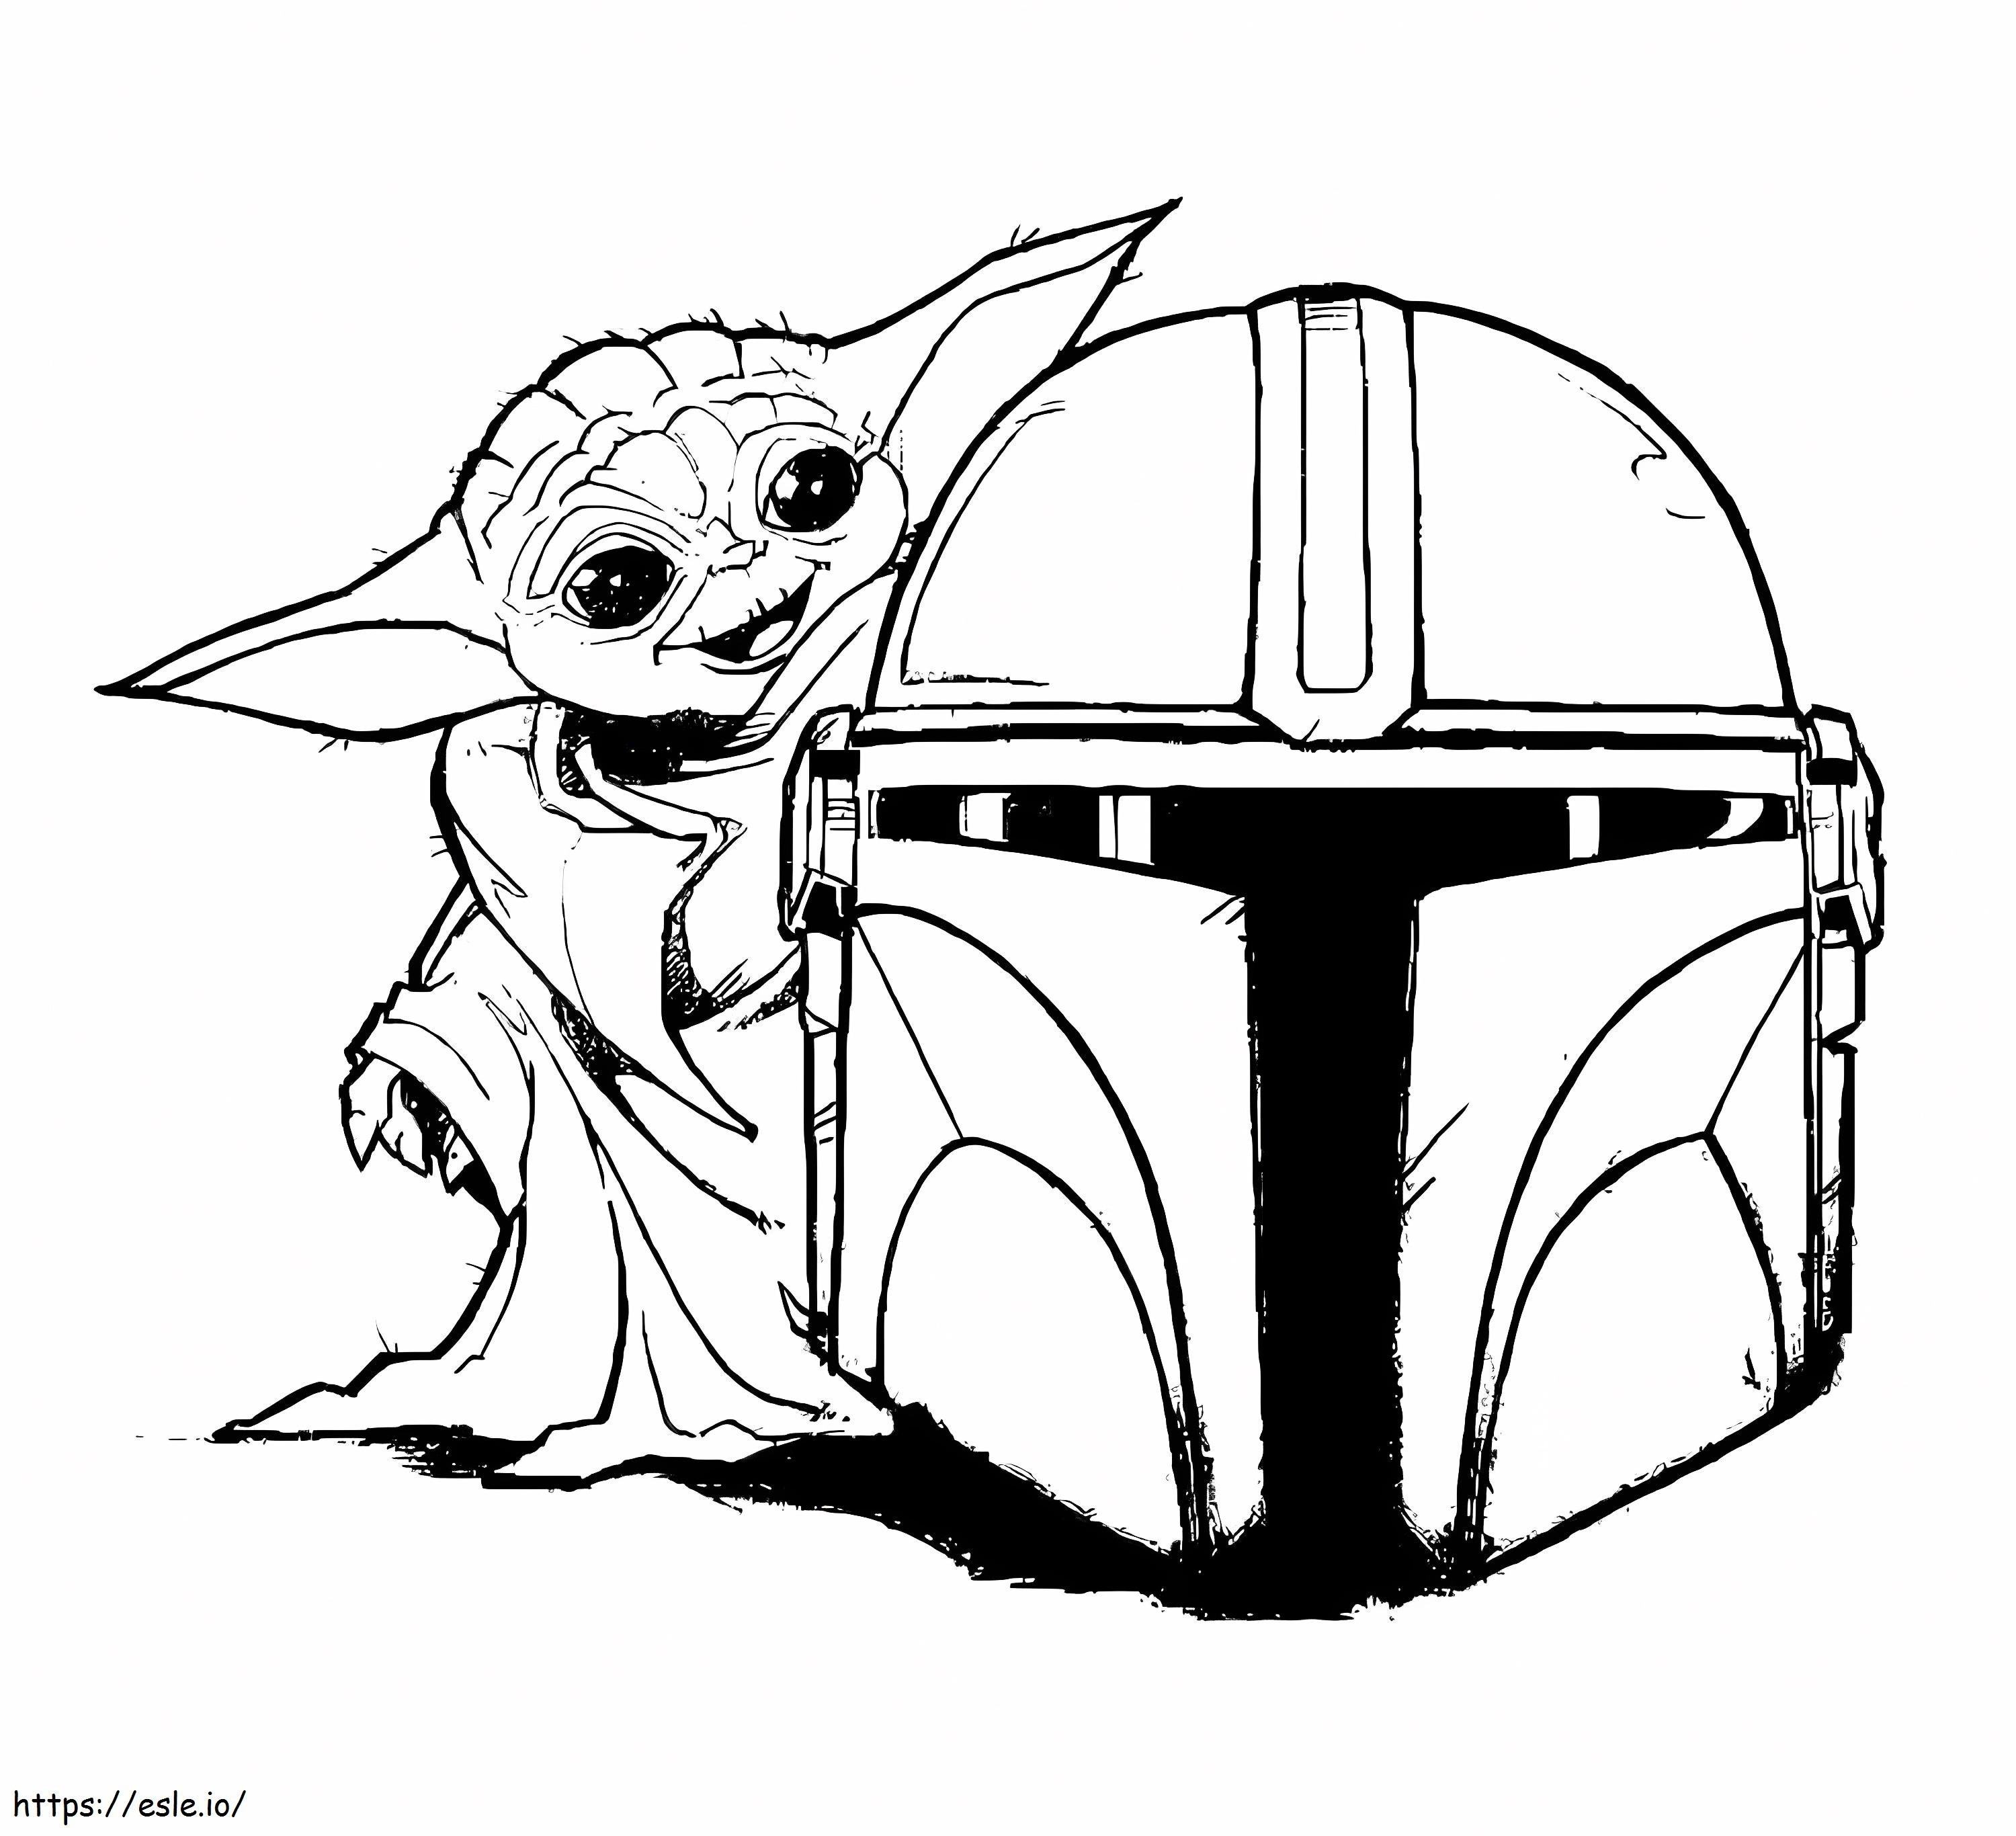 Baby Yoda And Helmet coloring page